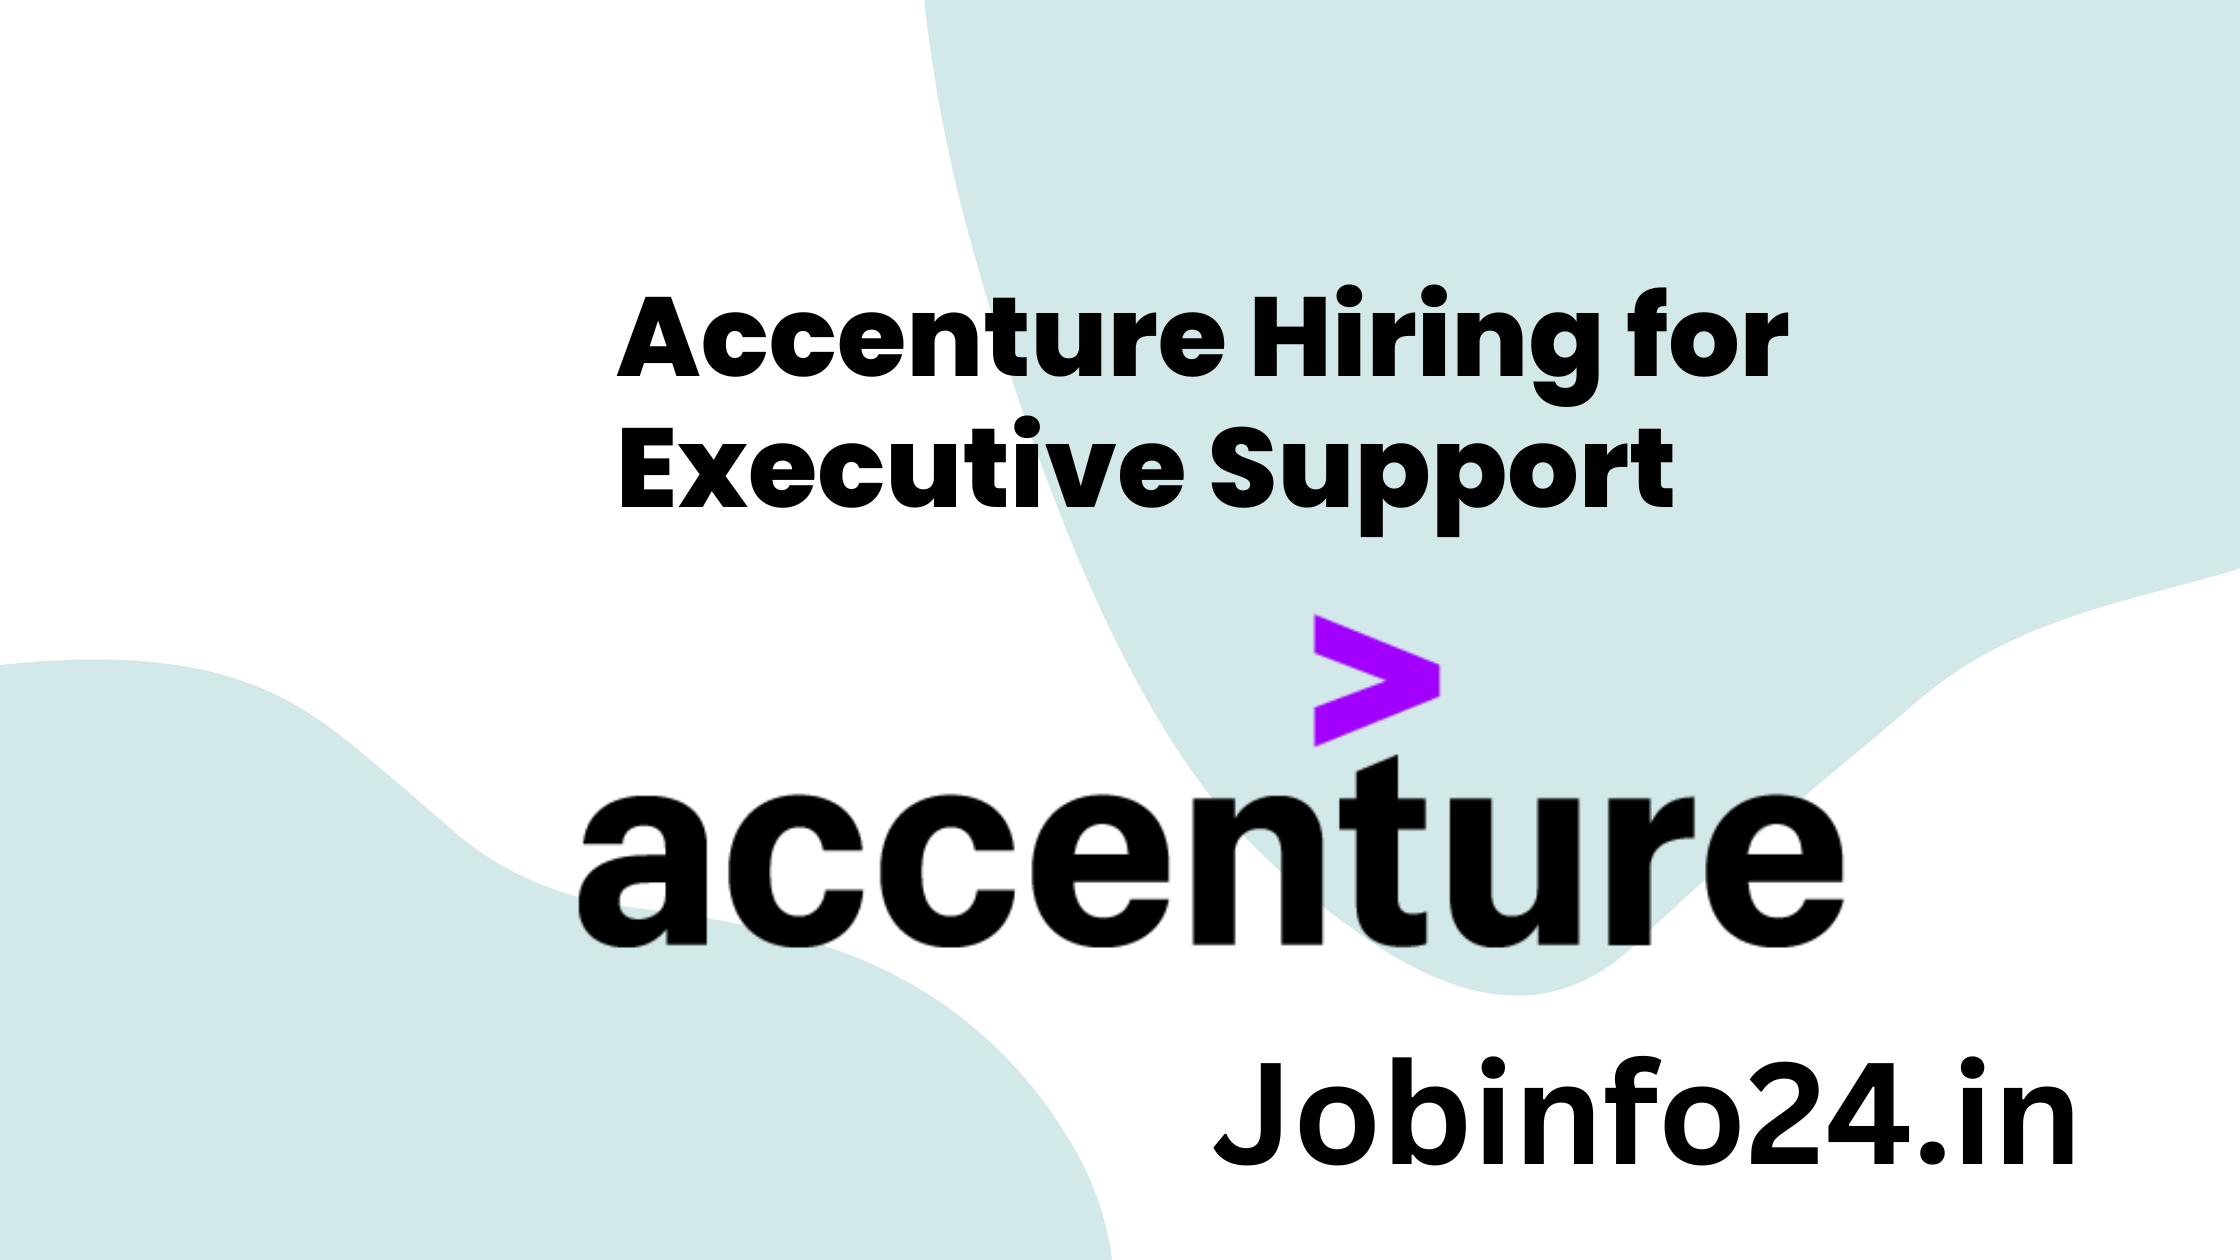 Accenture Hiring for Executive Support